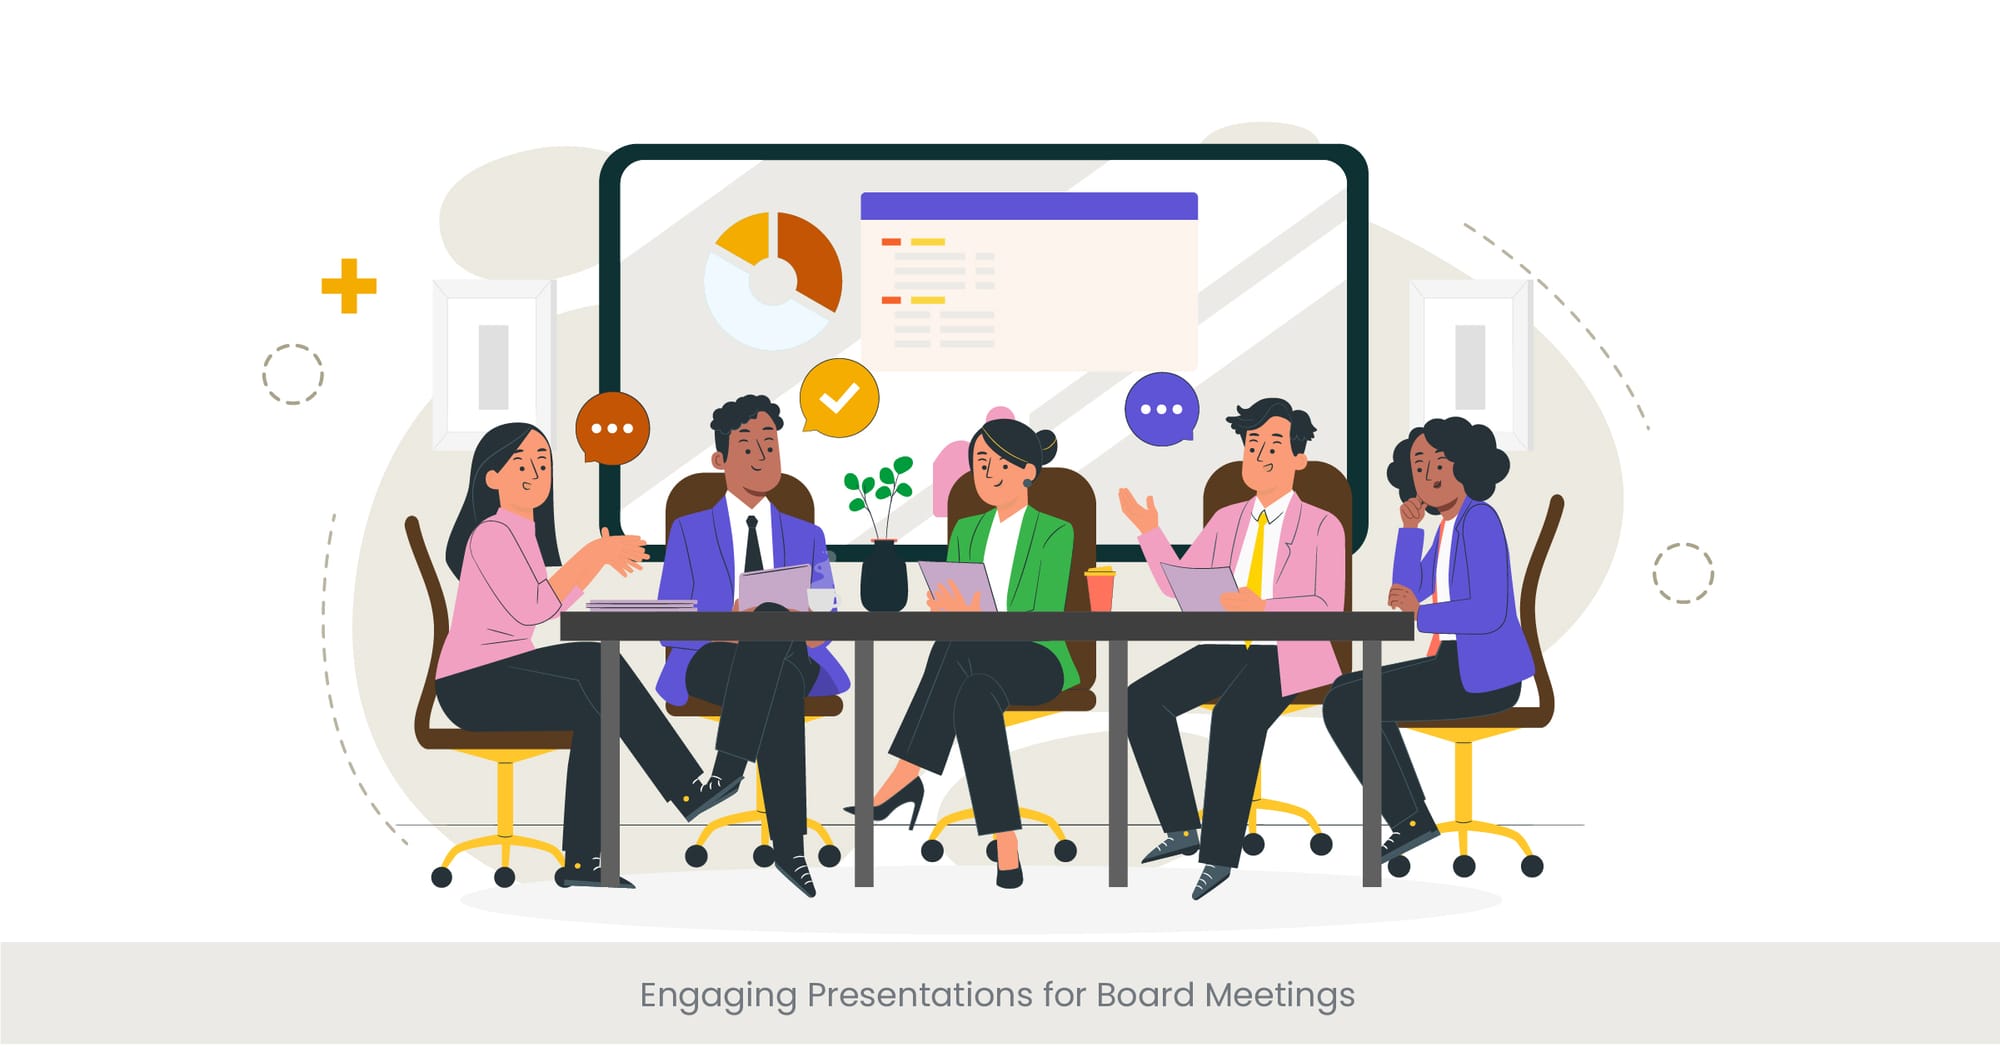 Engaging Every Audience Through Diverse Presentation Styles